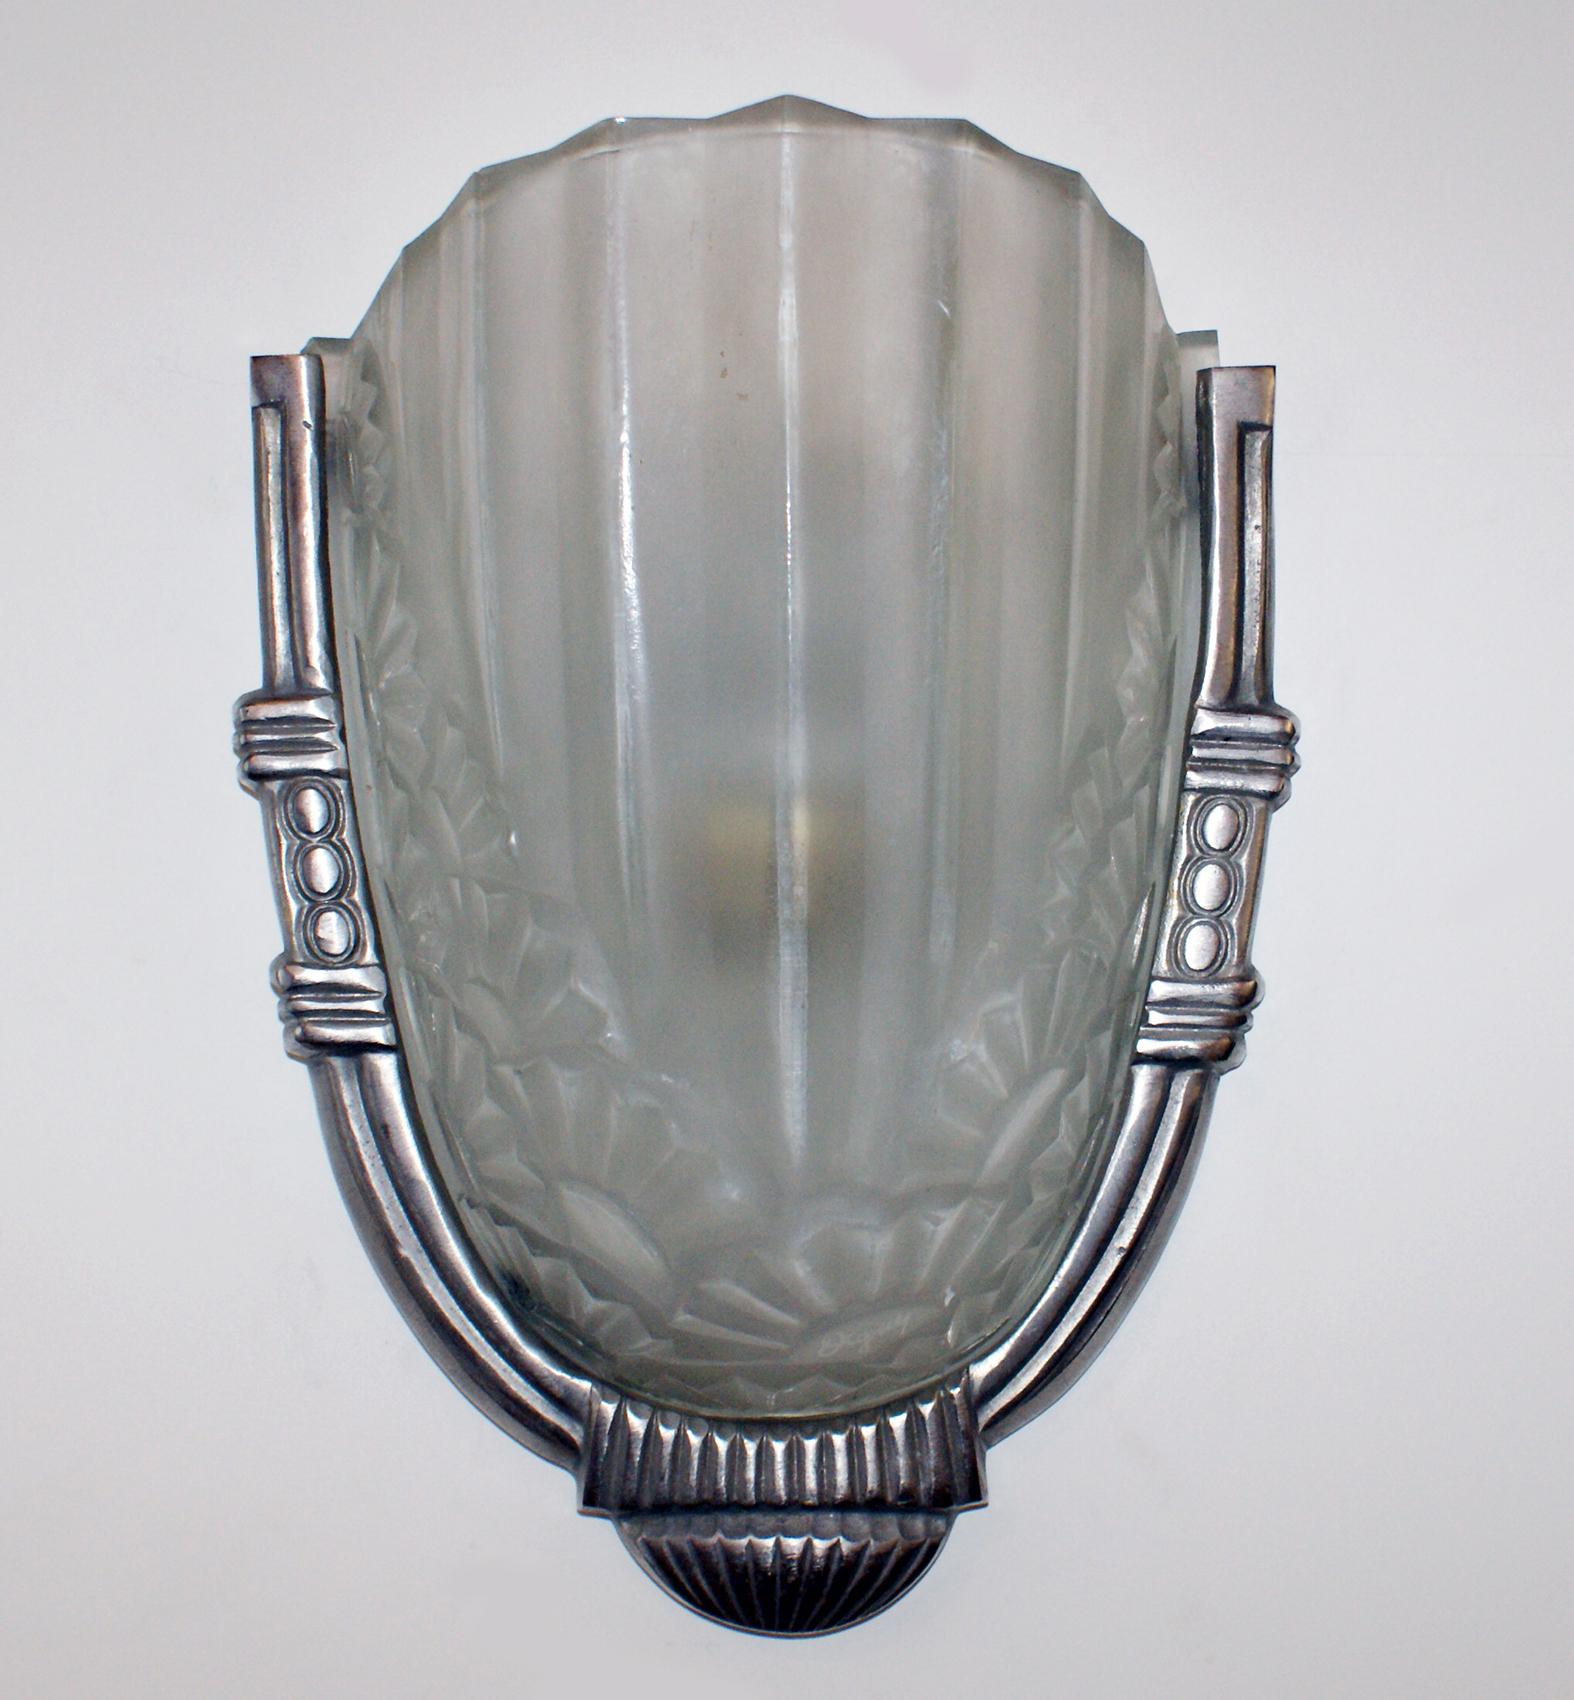 Frosted Pair of French Art Deco Sconces Signed “Degué”